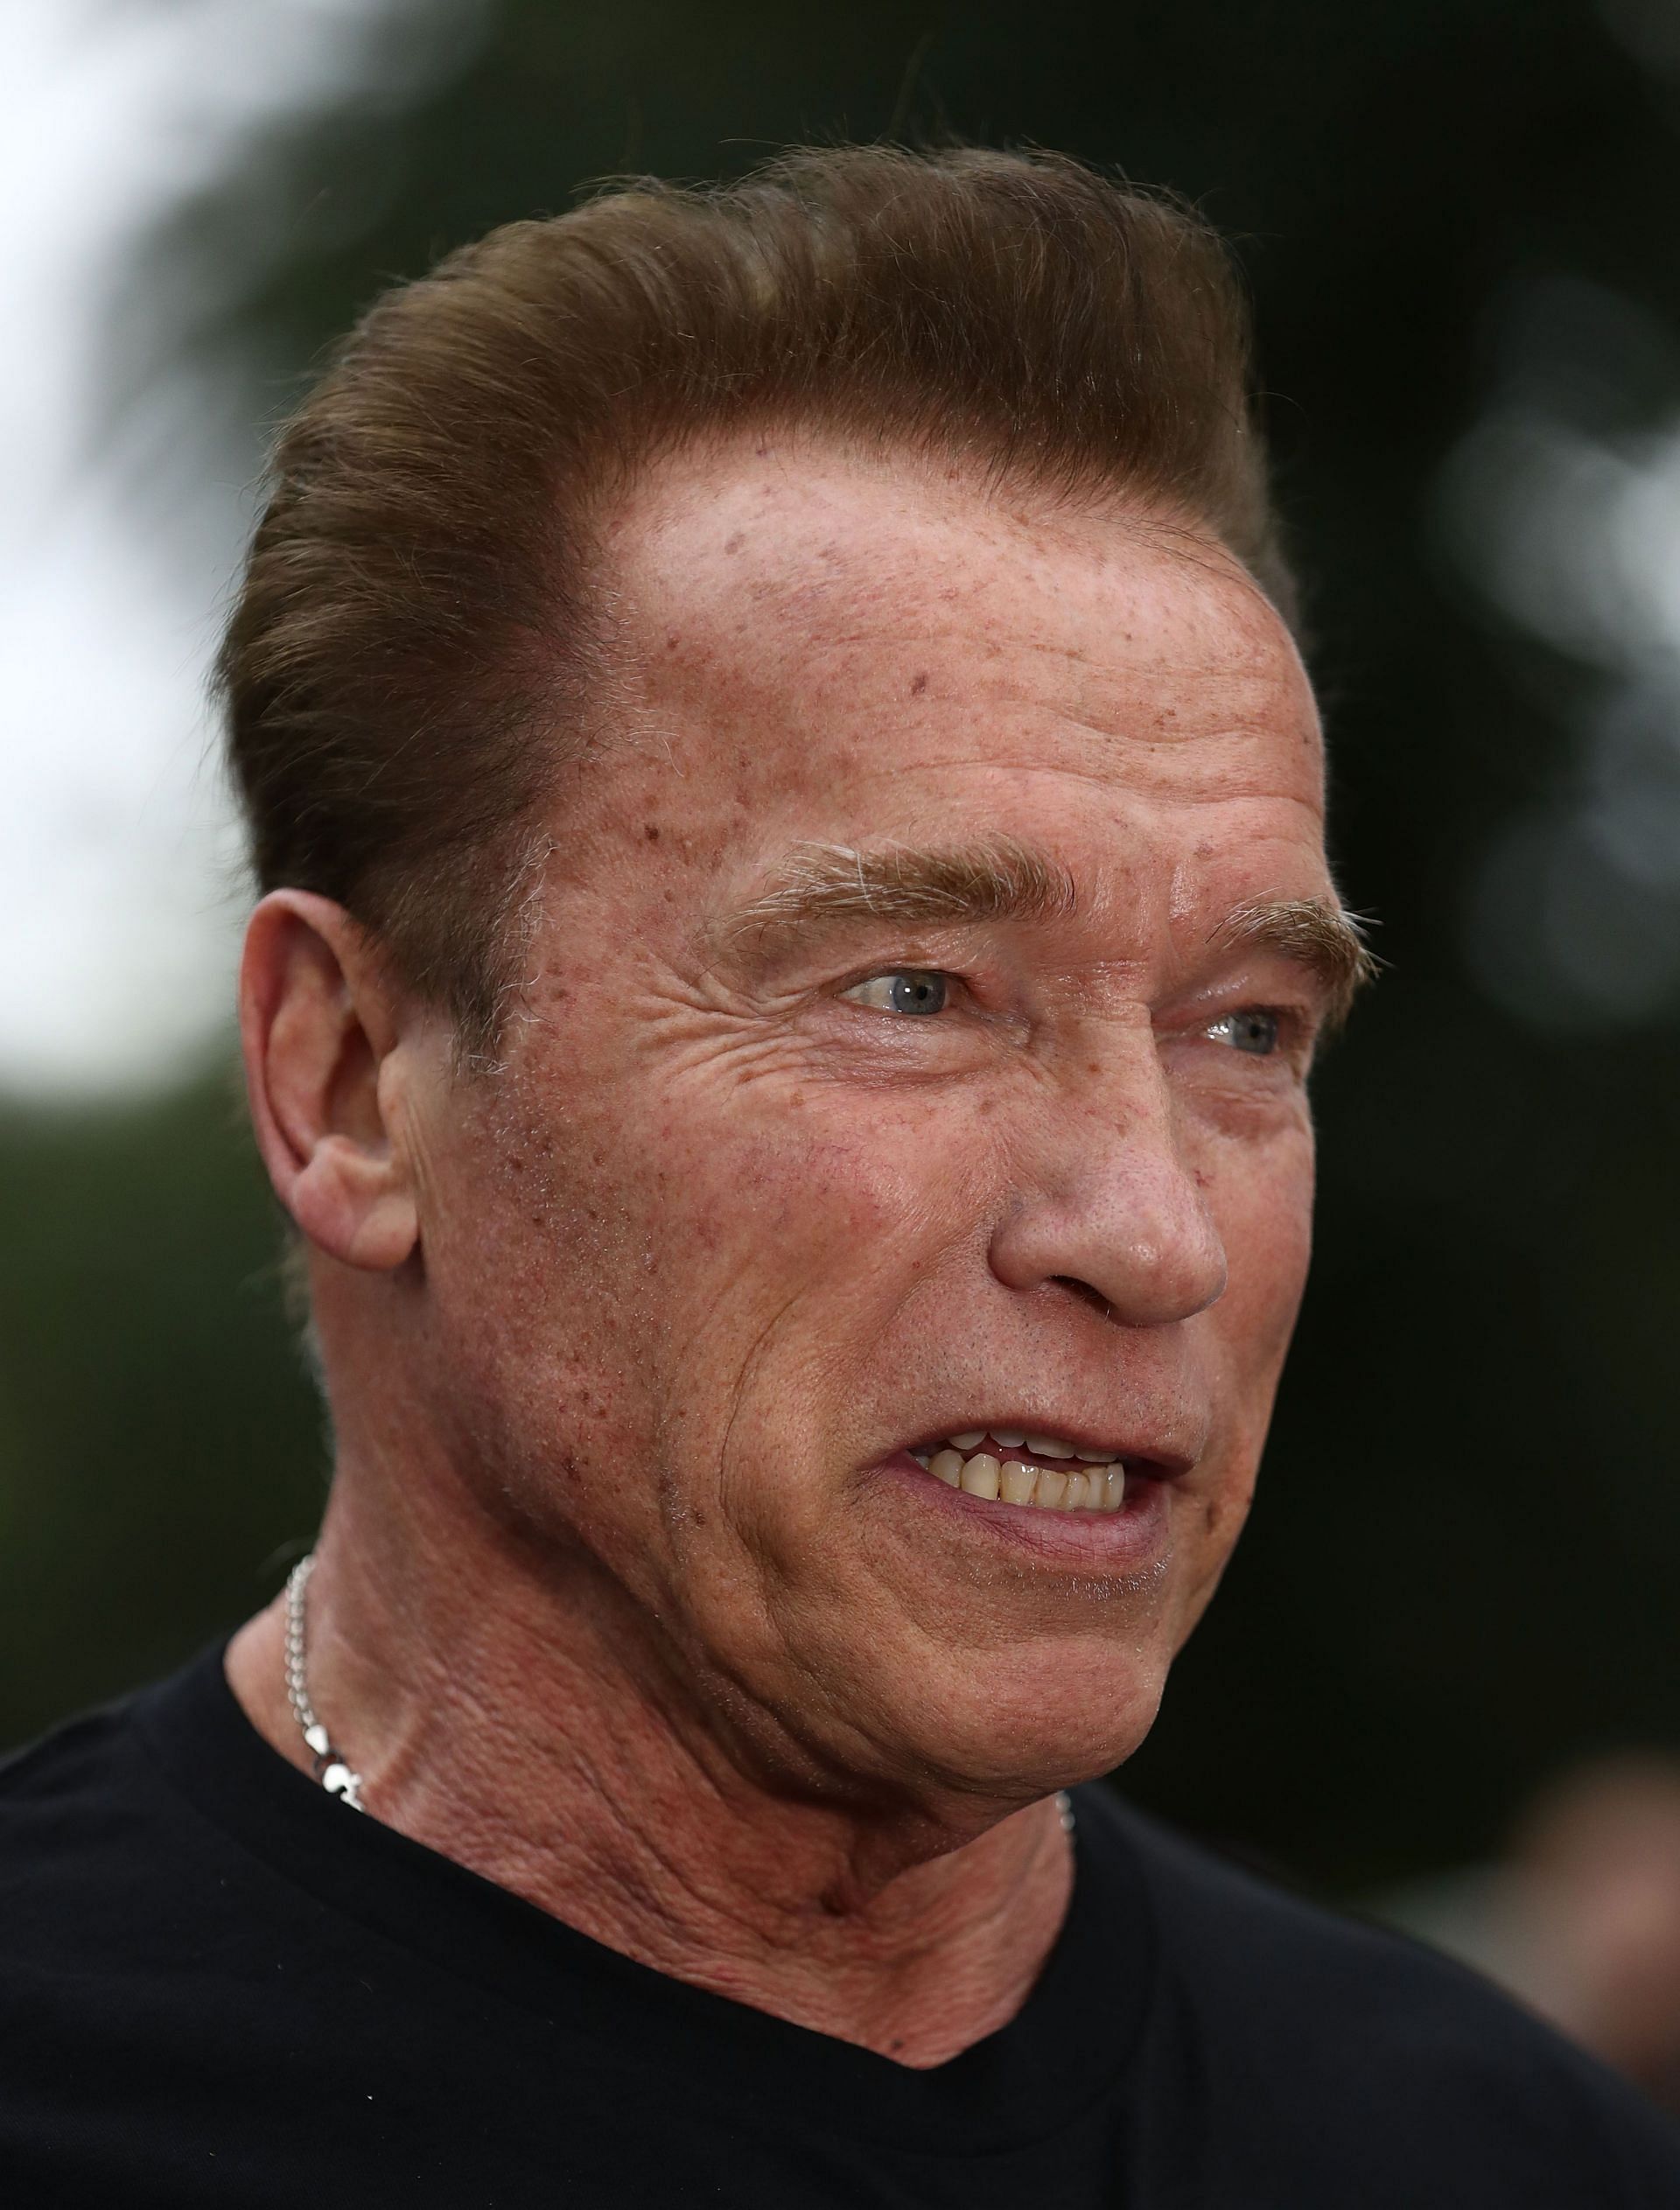 Arnold Schwarzenegger speaks to the media as he prepares to start the Run for the Kids charity run as part of the Arnold Sports Festival Australia in 2018